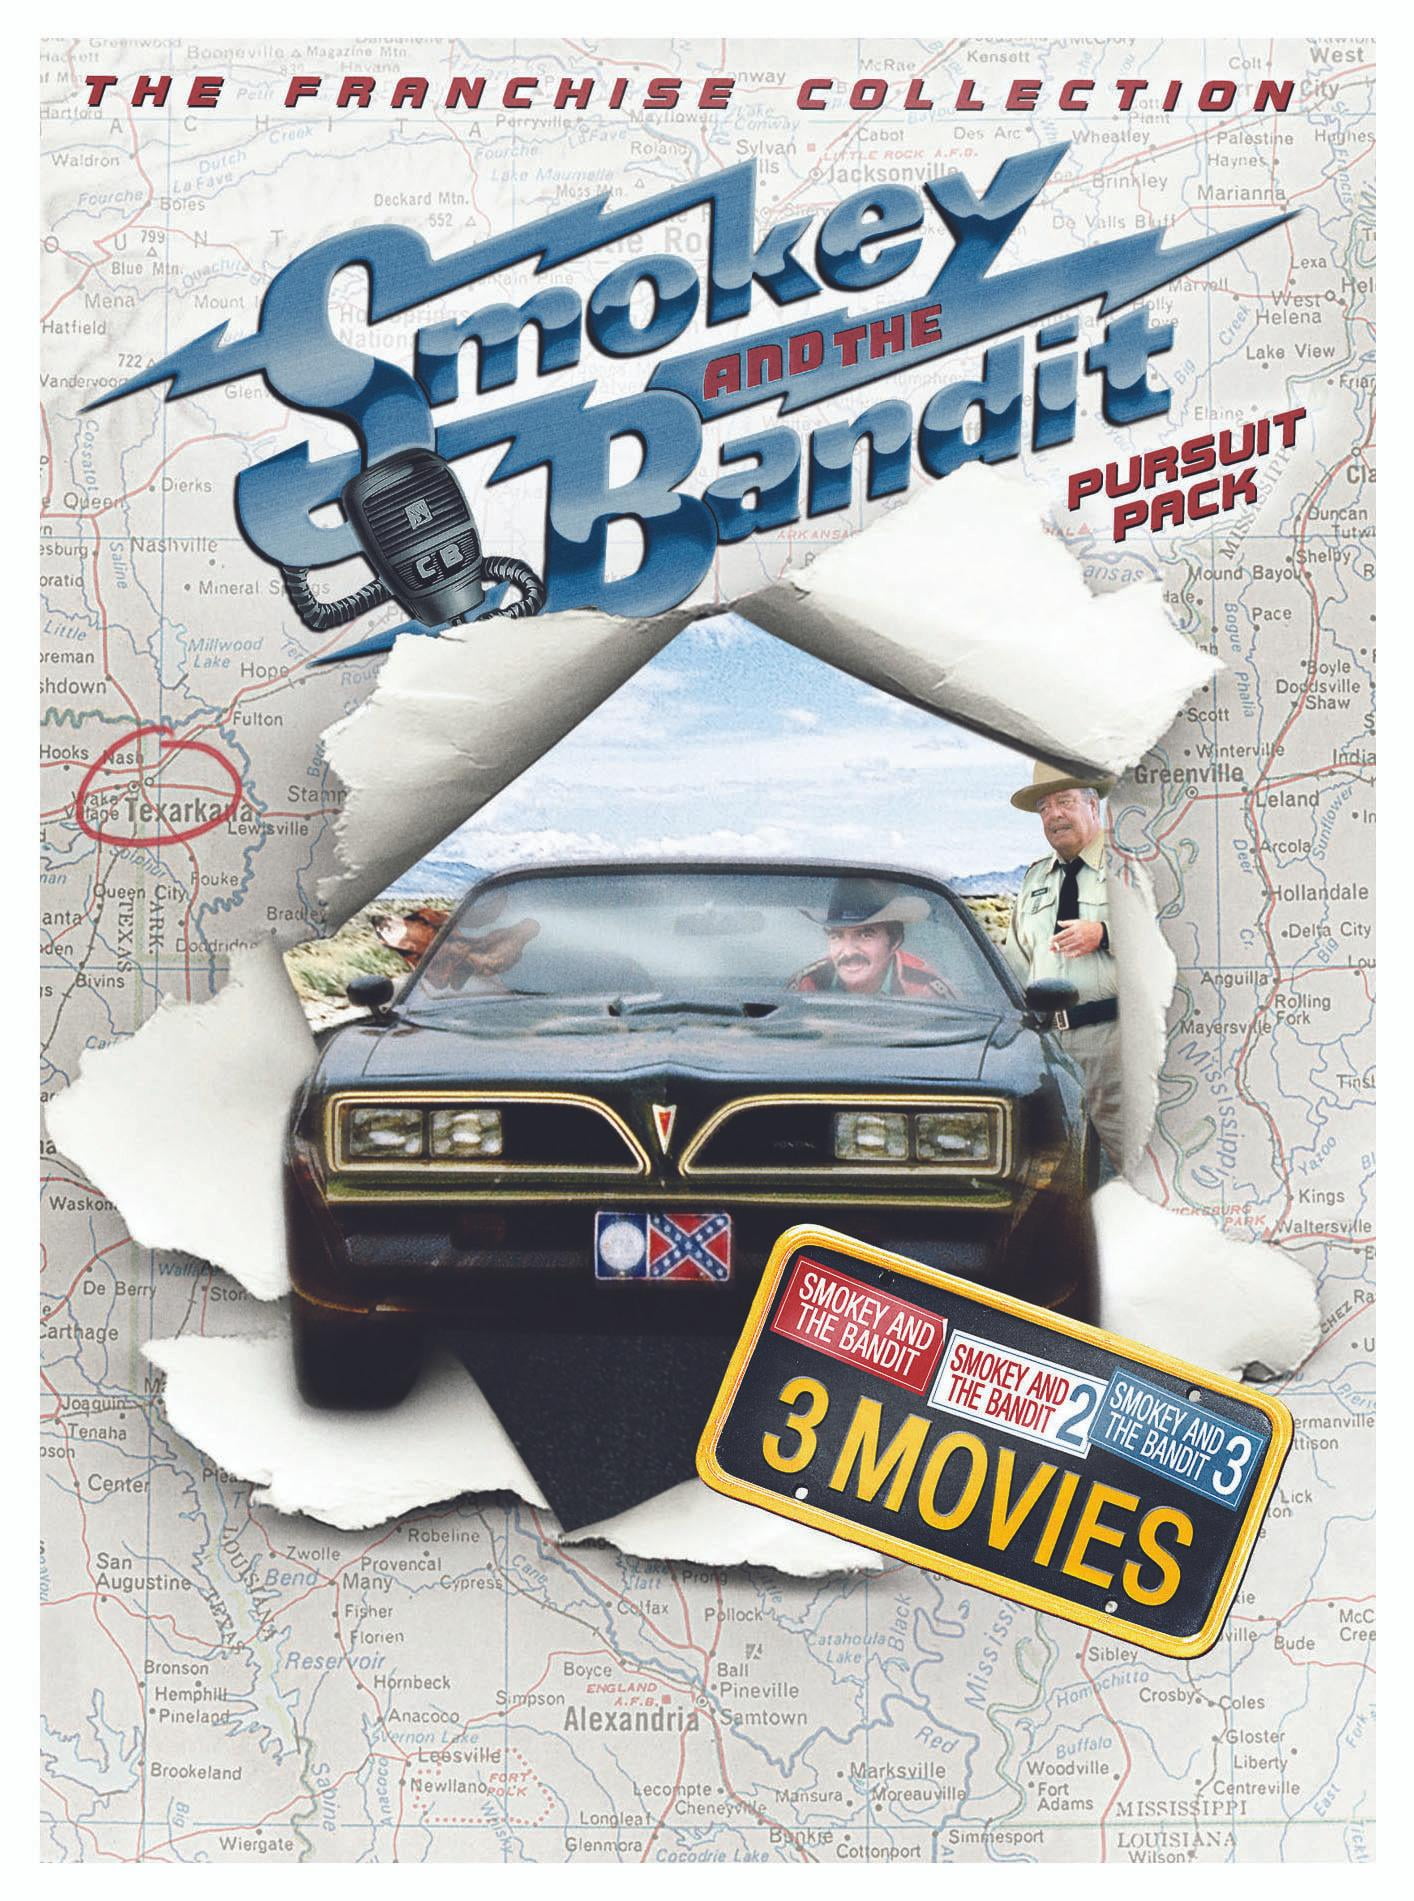 SDS Smokey and the Bandit Pursuit Pack (Smokey and the Bandit / Smokey and the Bandit II / Smokey and the Bandit: Part 3 (DVD)